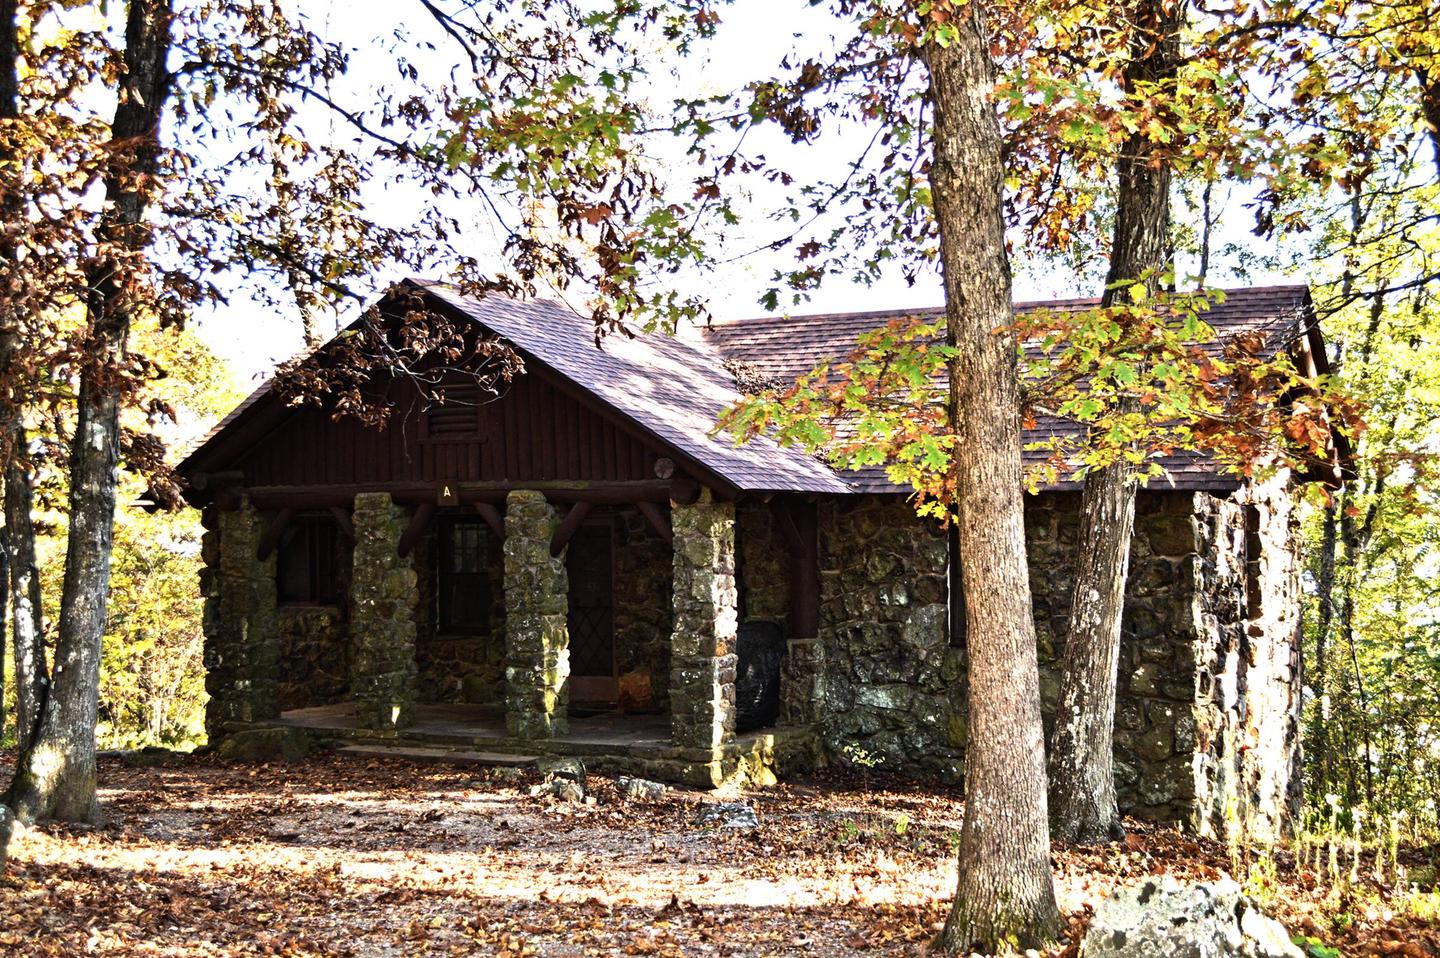 WHITE ROCK MOUNTAIN RECREATION AREA CABIN ACabin A features incredible stone work, two bedrooms, full amenities, and spectacular views!